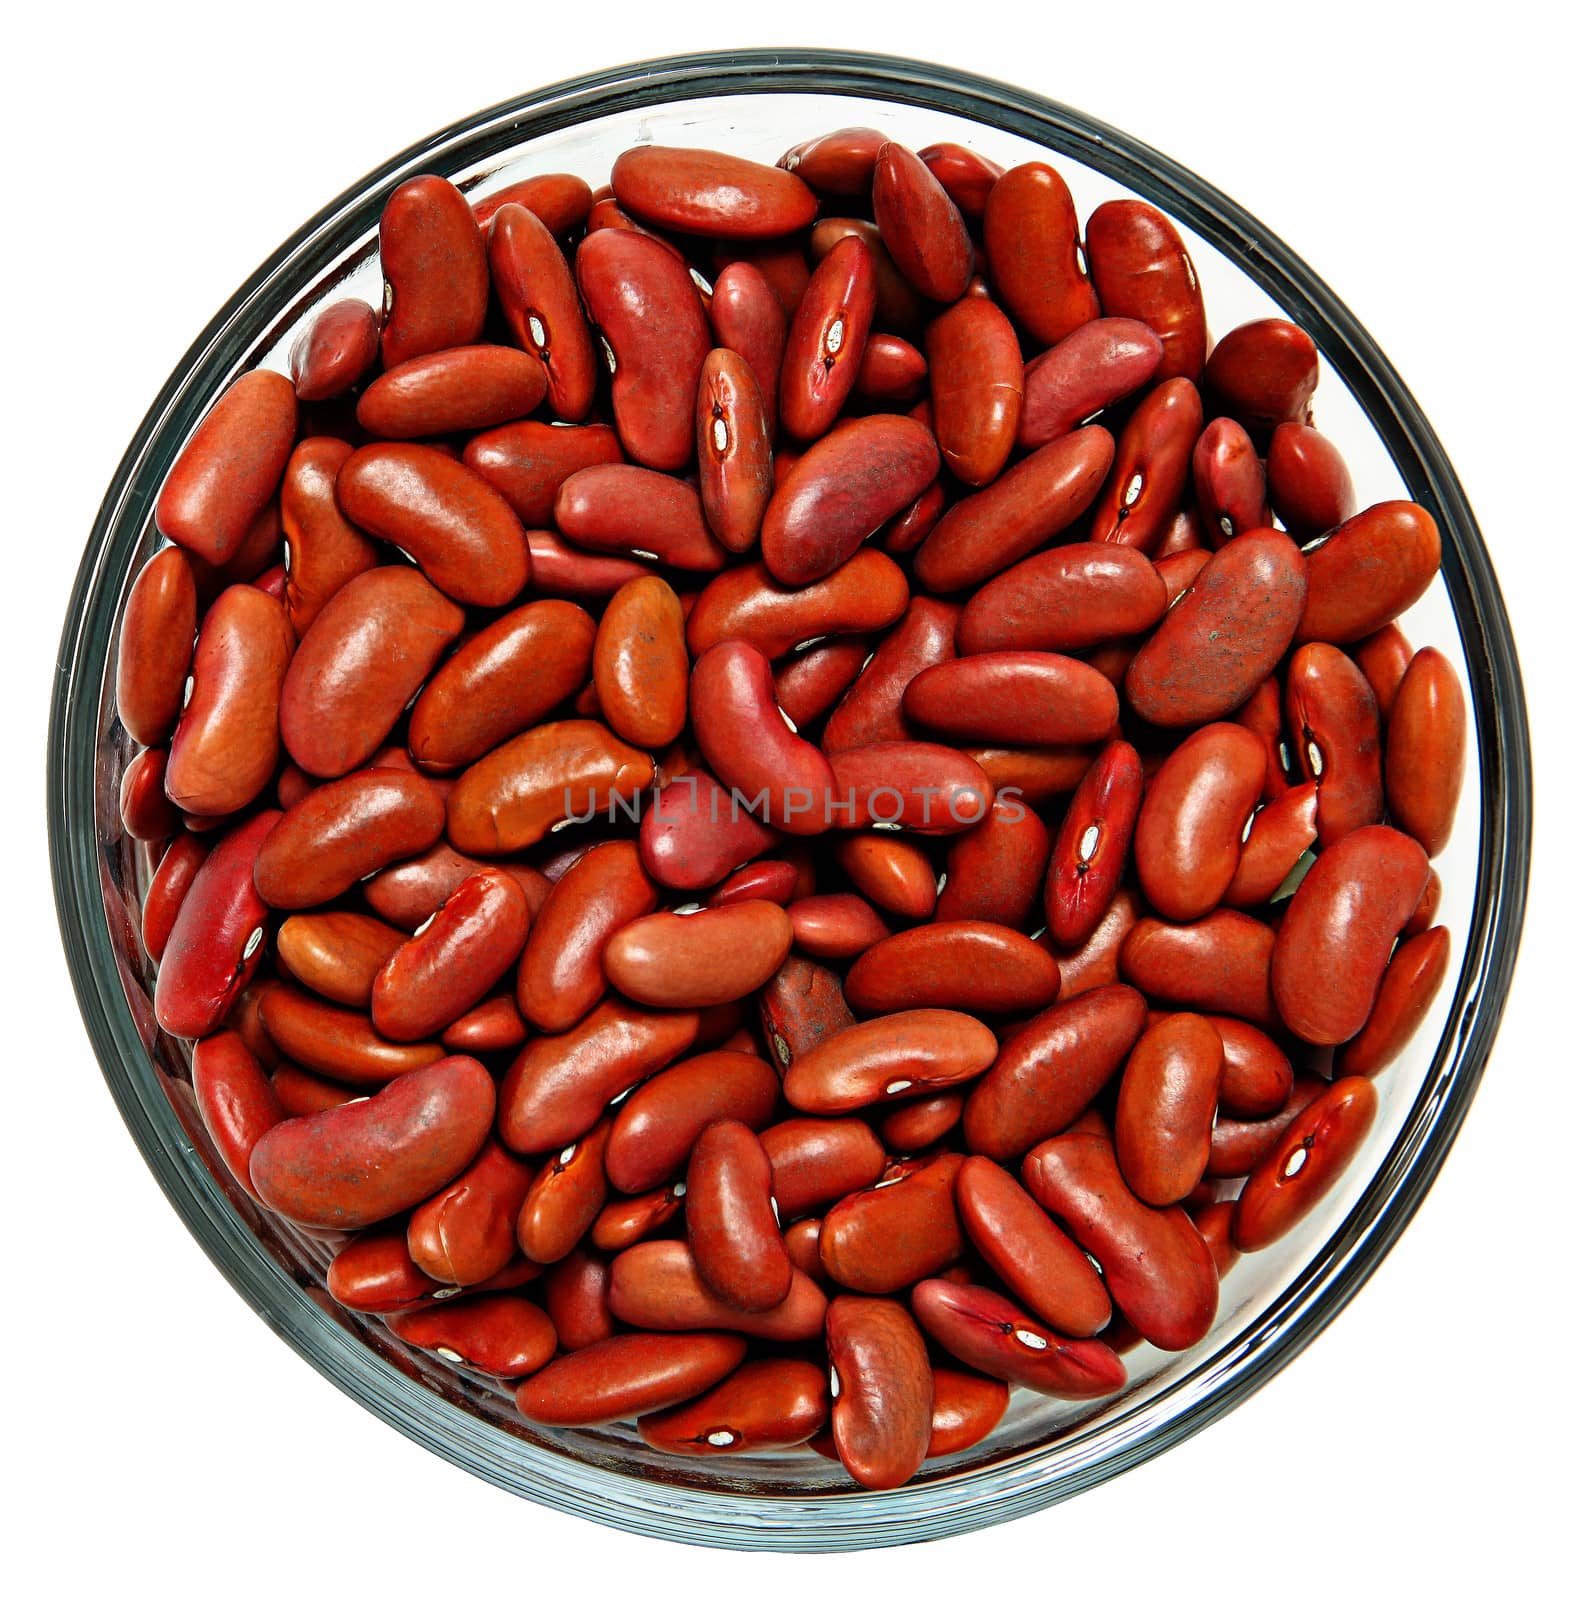 Raw Unwashed Dirty Red Beans in glass bowl over white.